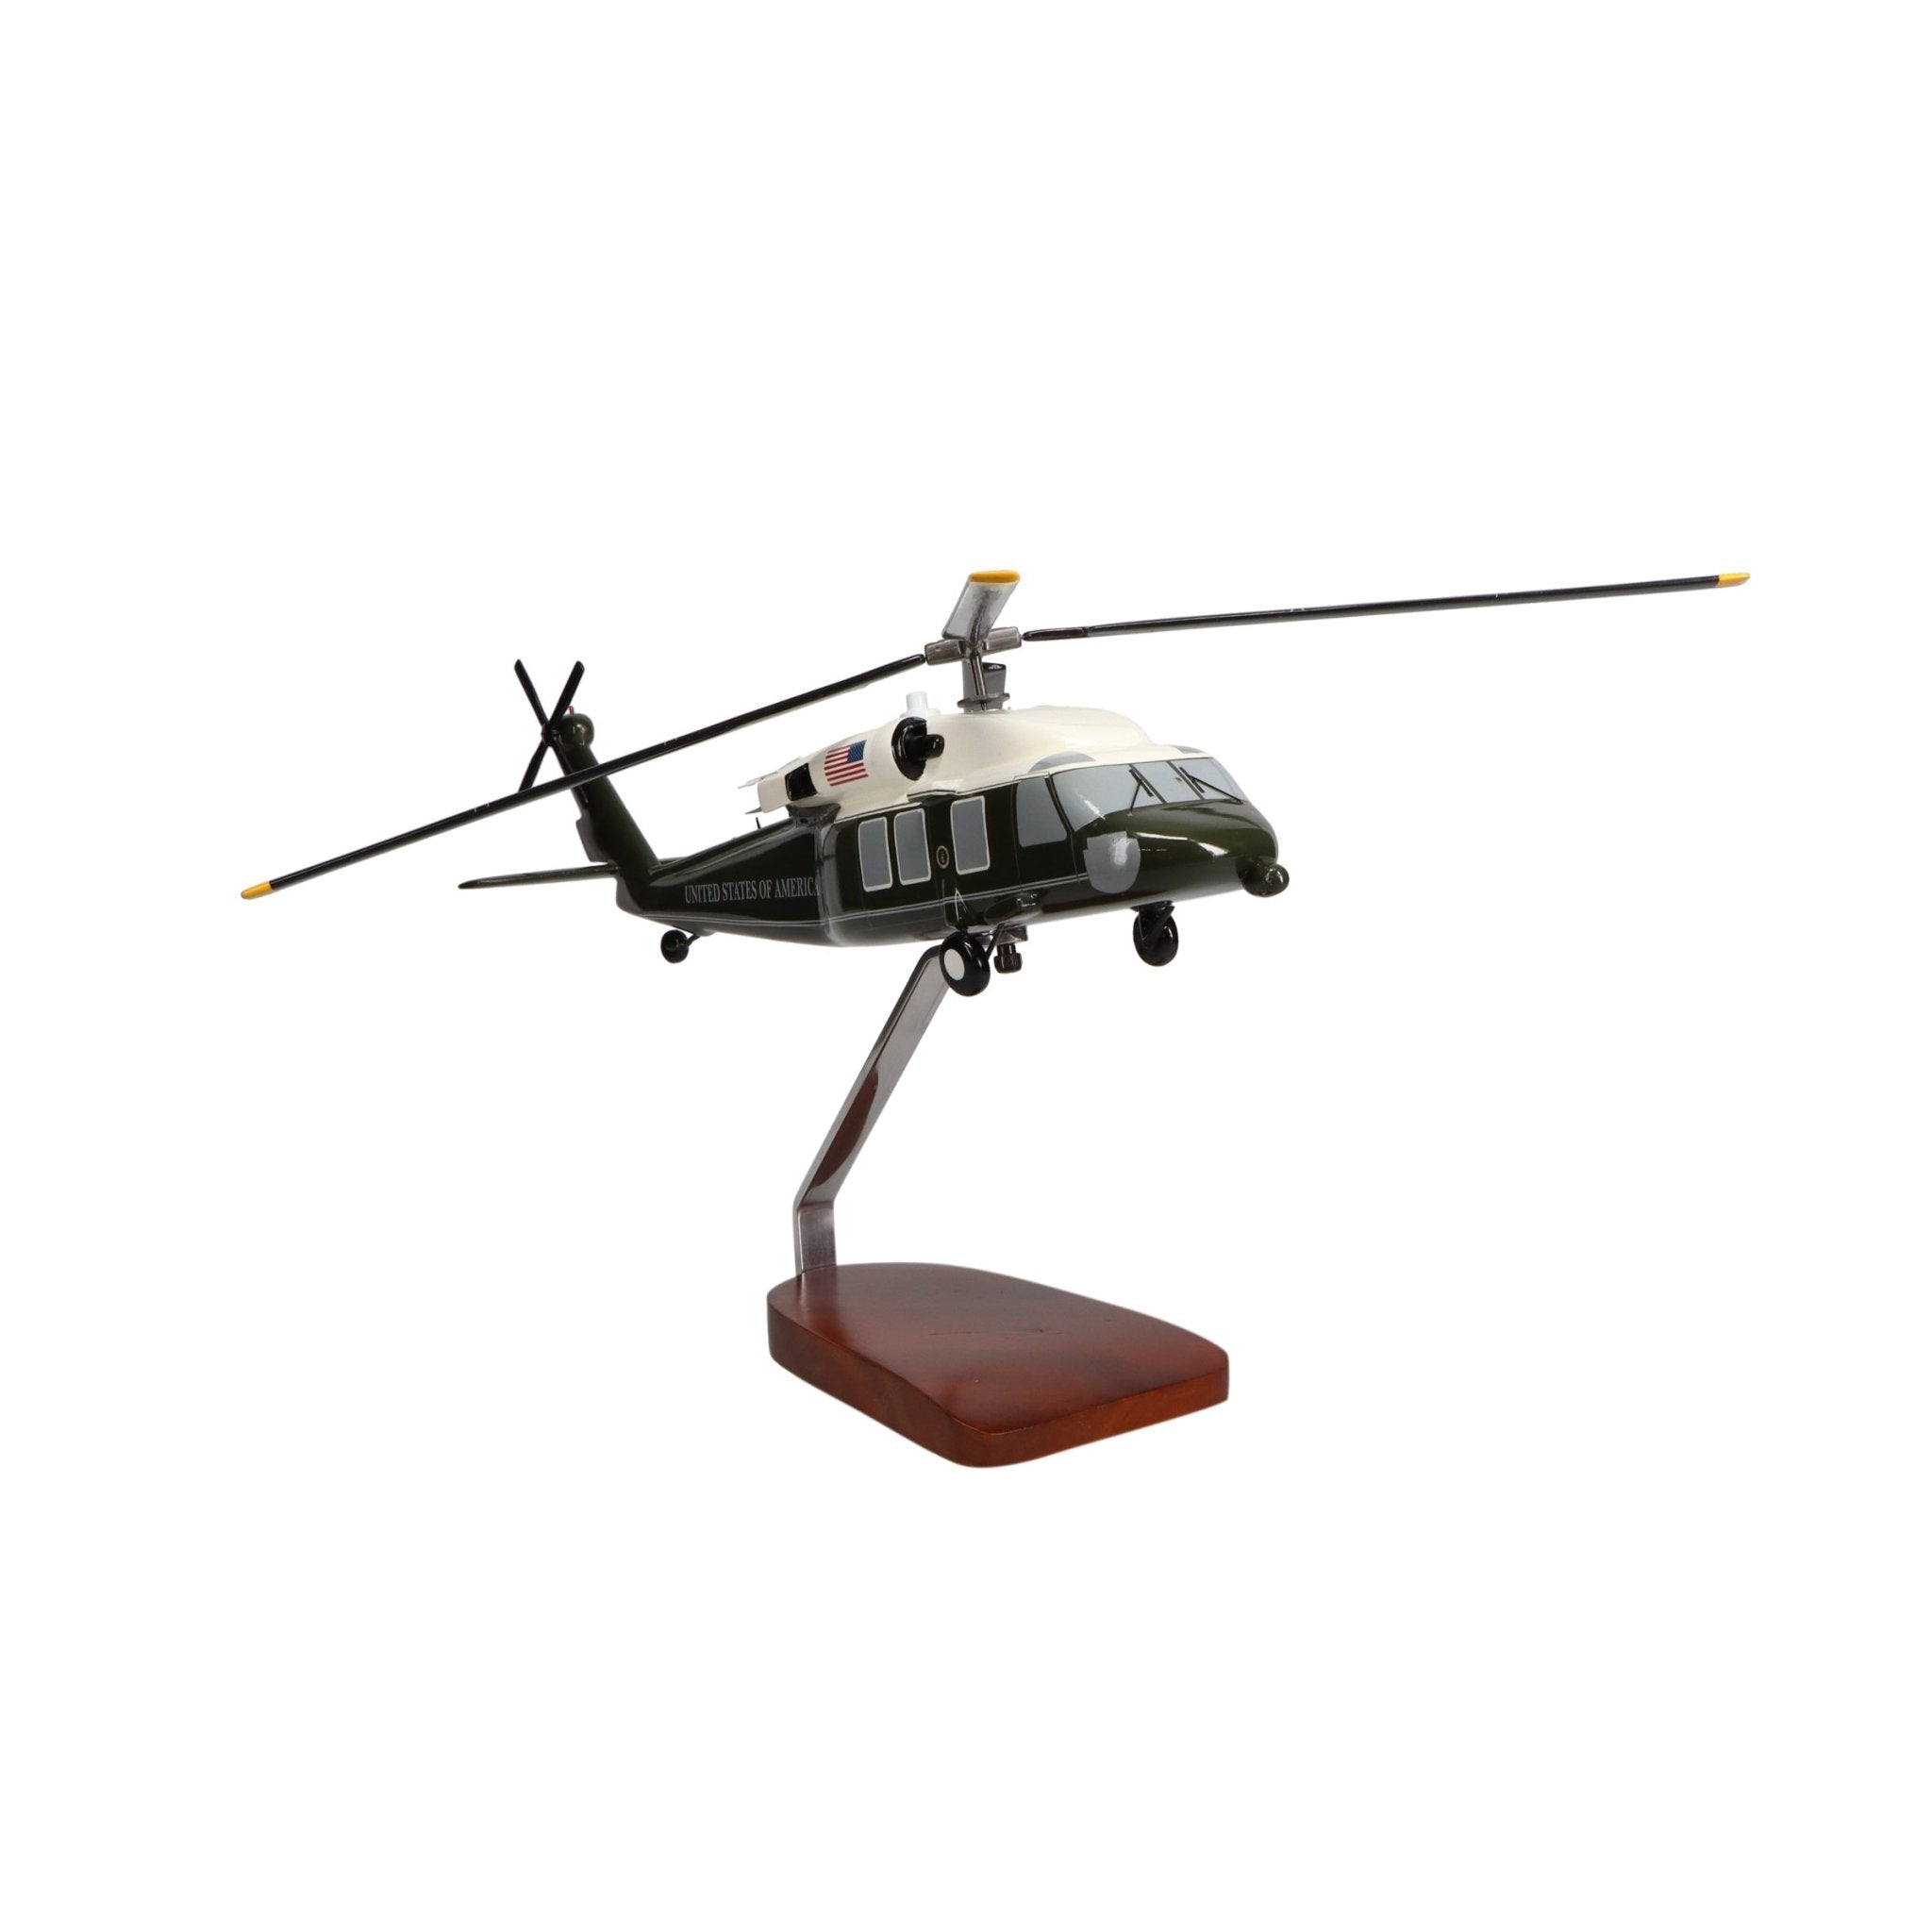 Sikorsky VH-60N White Hawk Marine One Limited Edition Large Mahogany Model - PilotMall.com